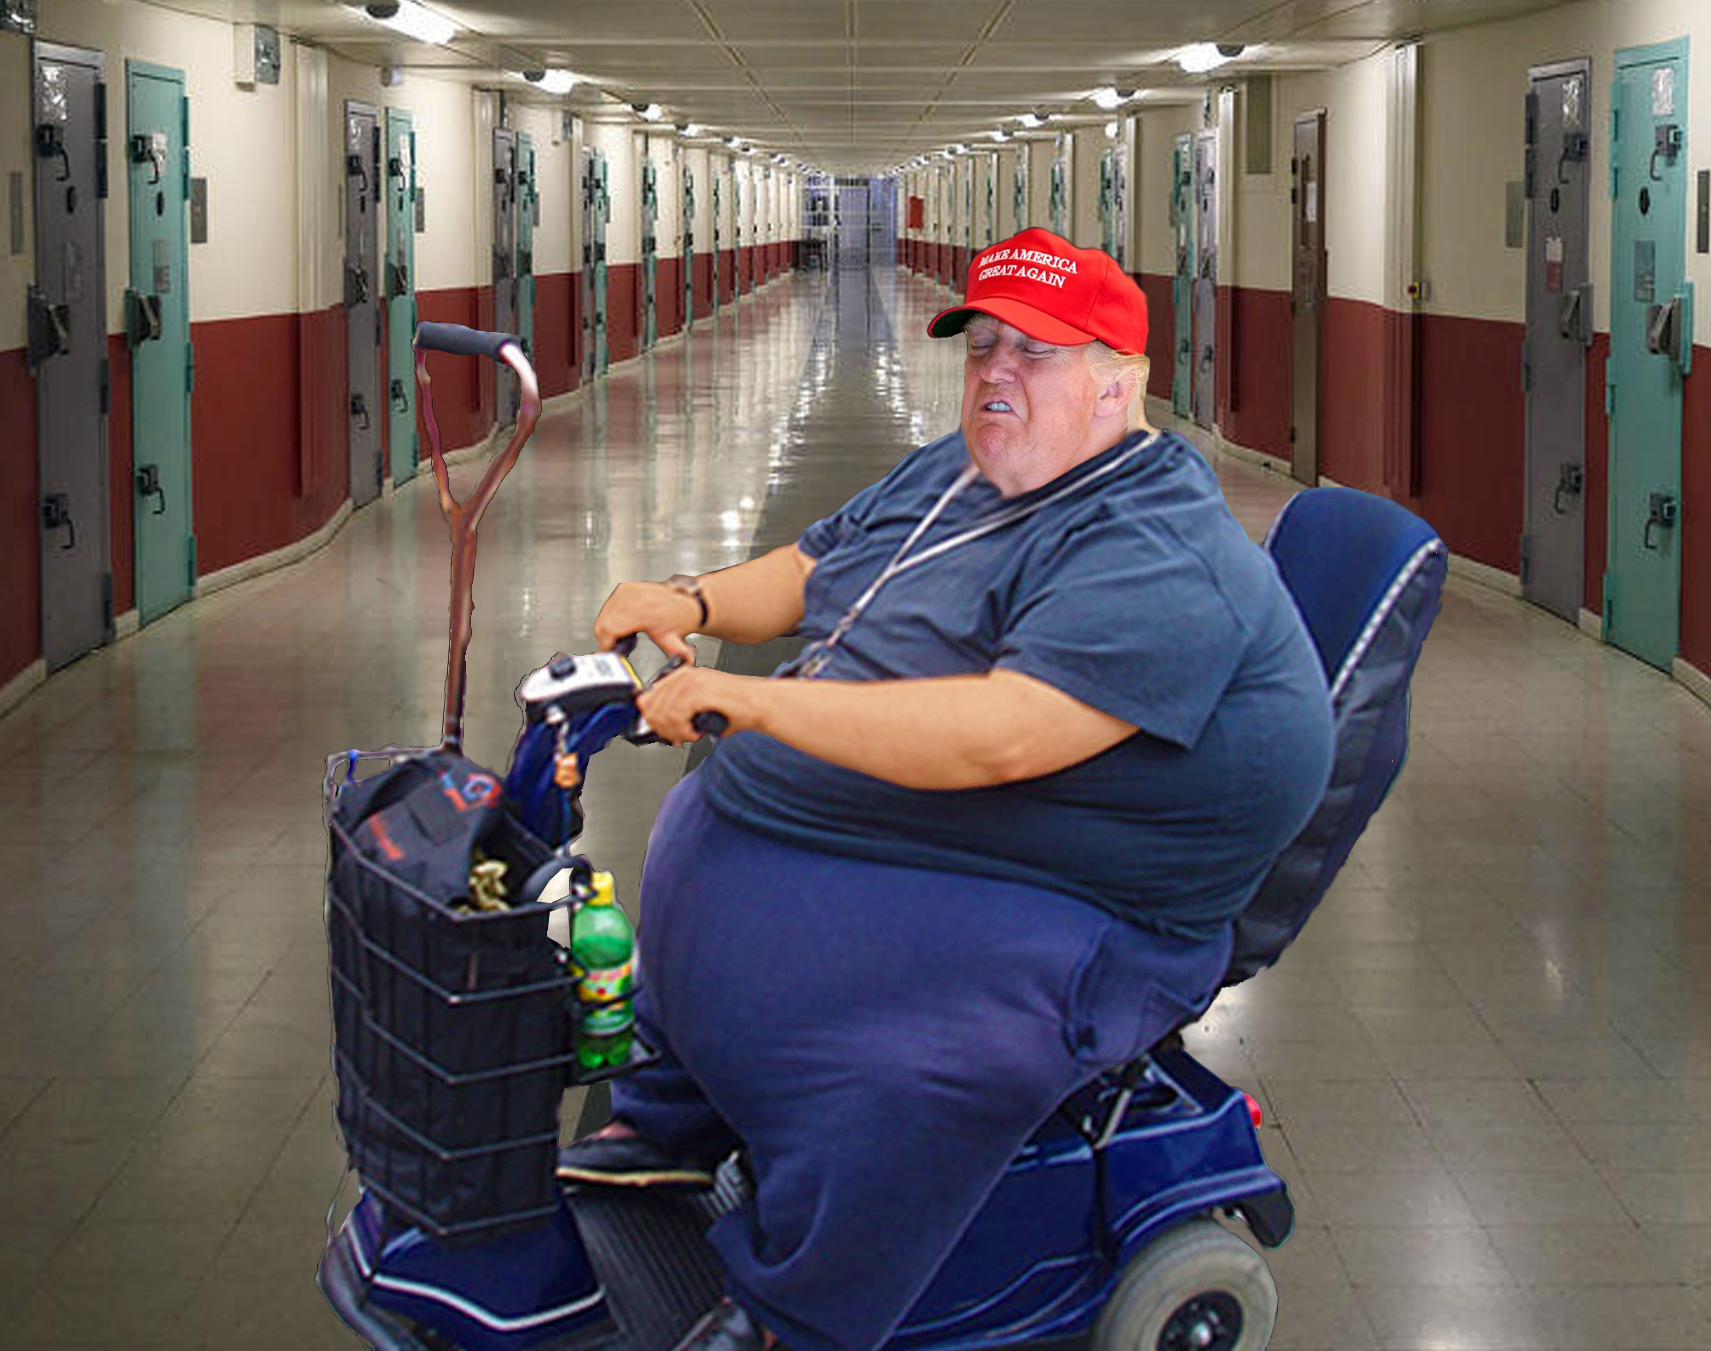 Trump in prison riding a scooter Blank Meme Template